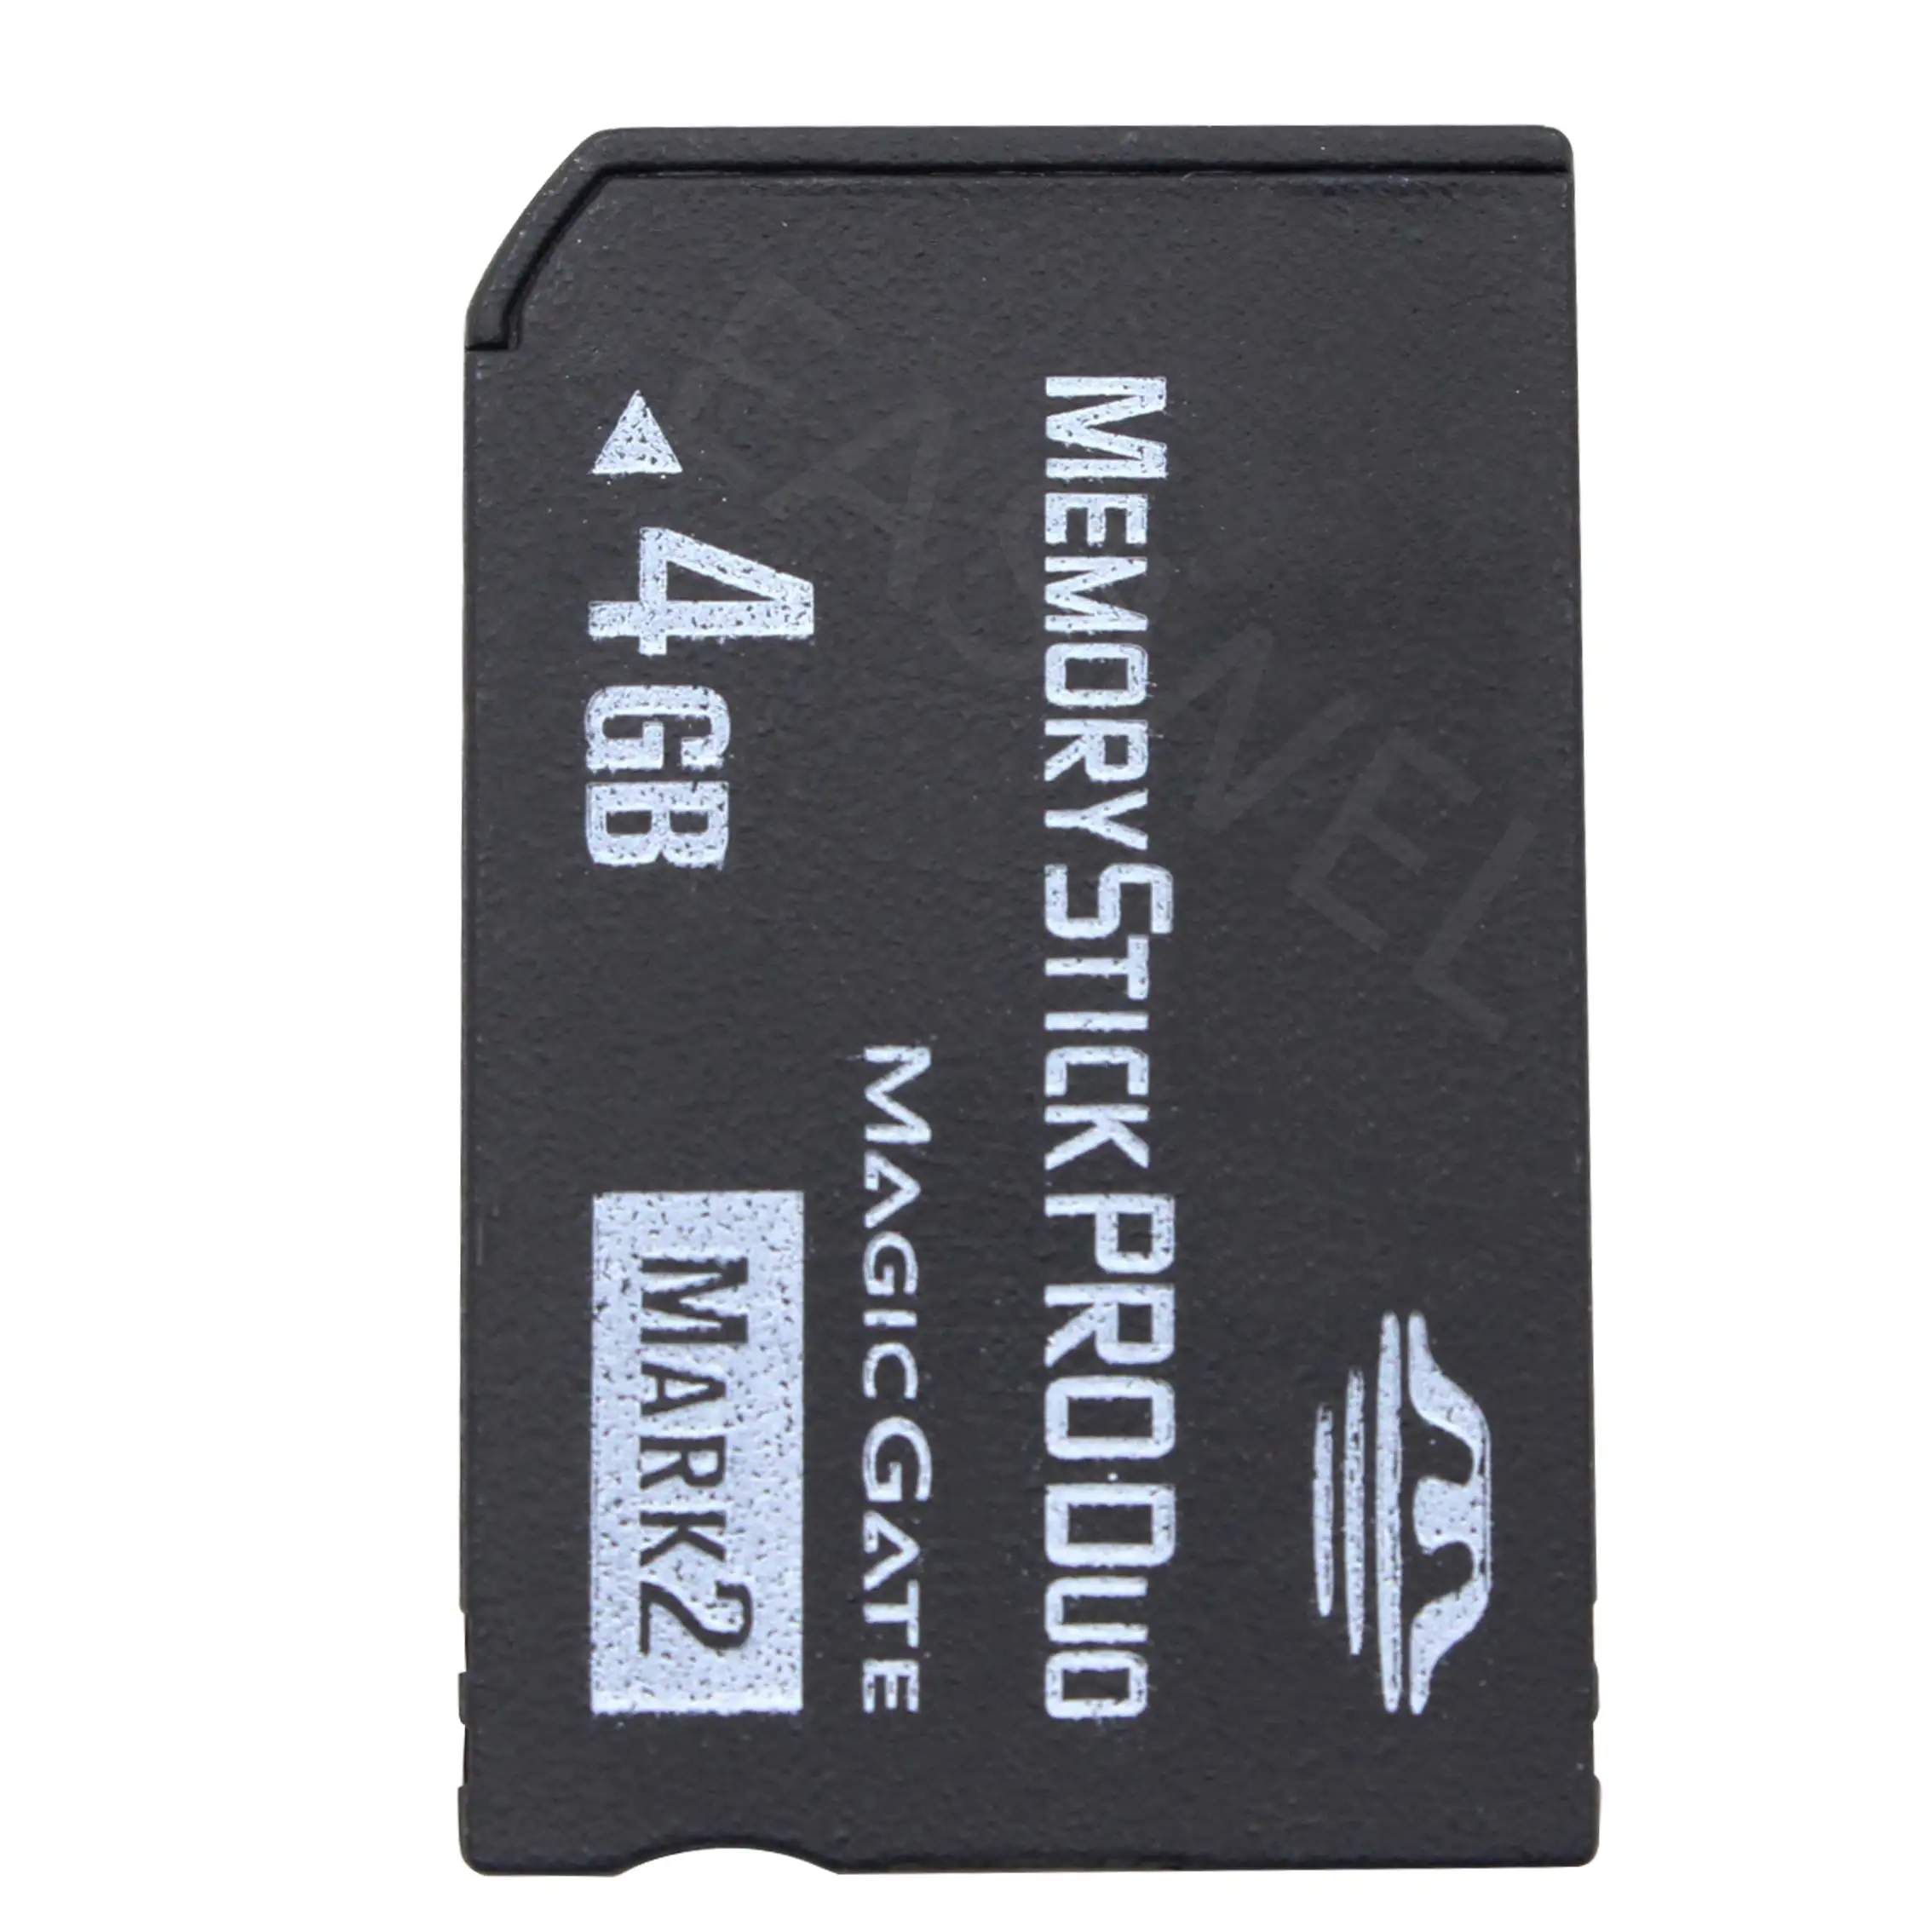 Sony 4gb Memory Stick Pro Duo Card for Sony SLT A65 A55 A35 A33 A77 